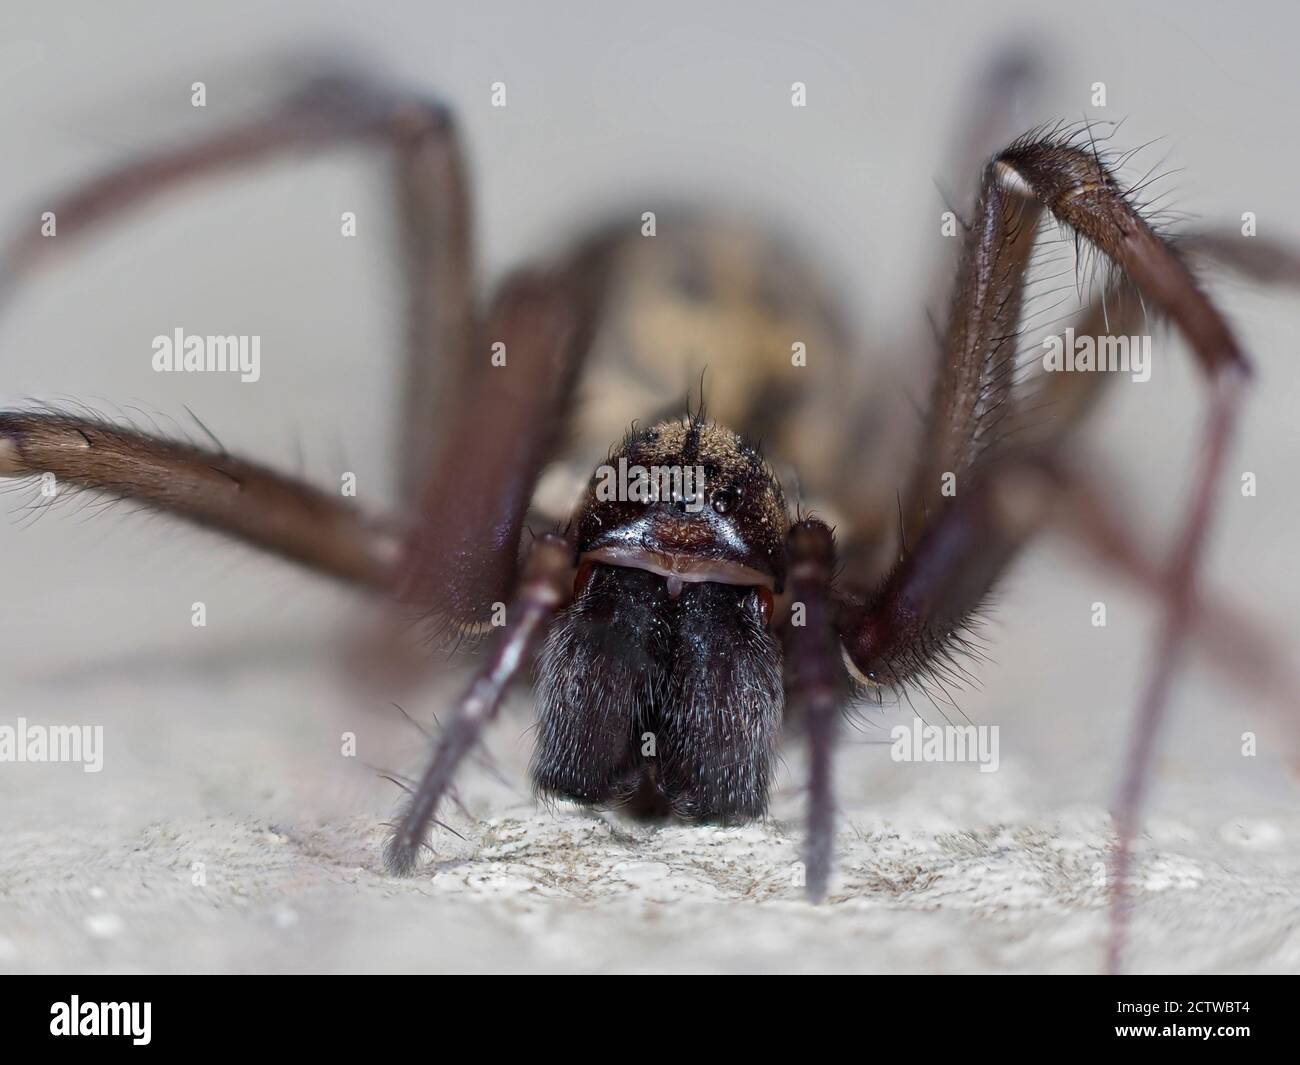 House Spider (Tegenaria domestica) close up of face and maindibles, on patio in garden, Kent UK, stacked focus image Stock Photo